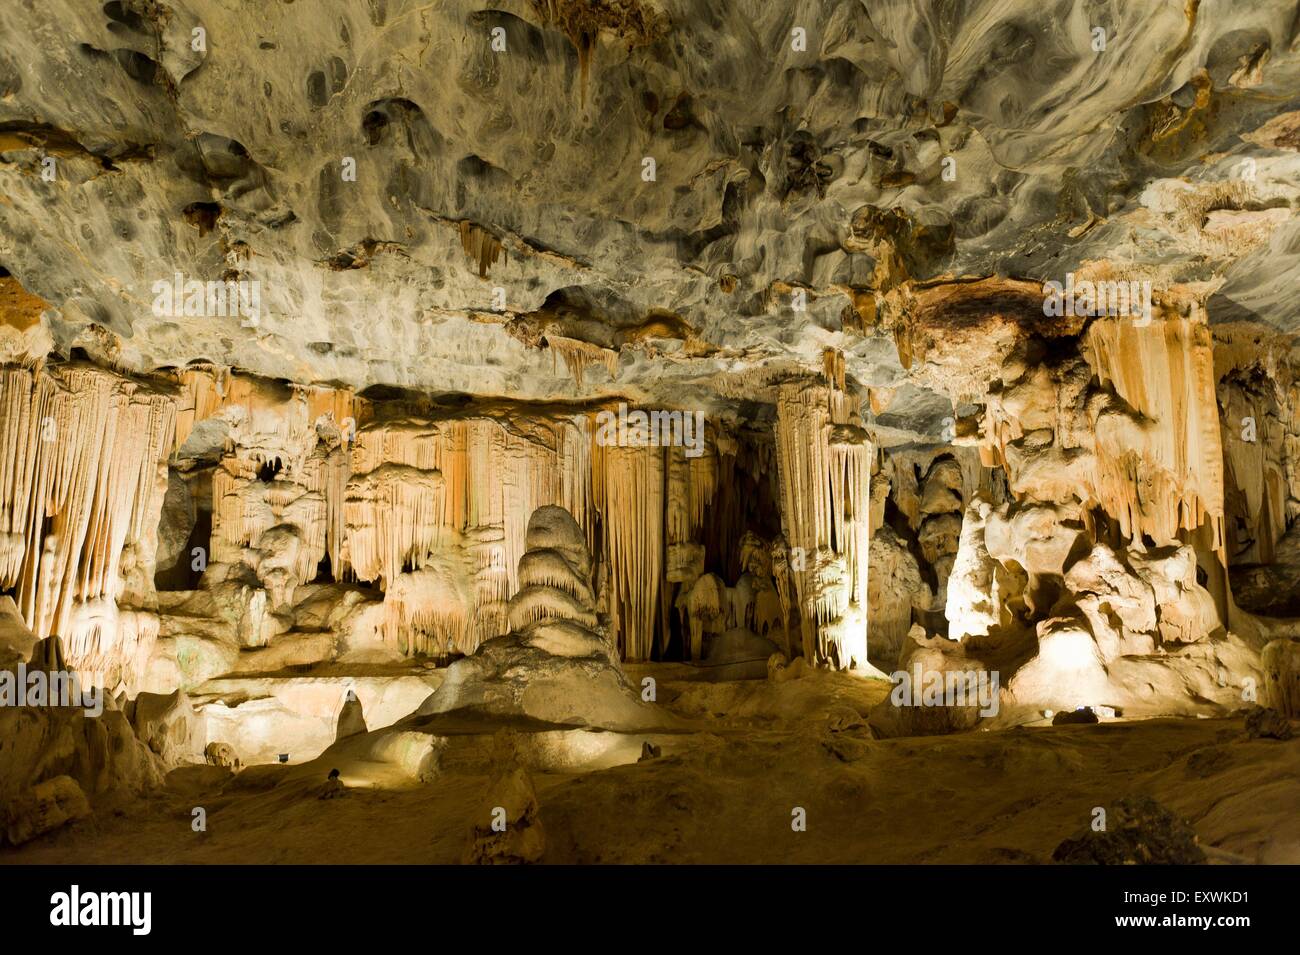 Van Zyl's Hall inside the Cango Caves, Oudtshoorn, Western Cape, South Africa Stock Photo